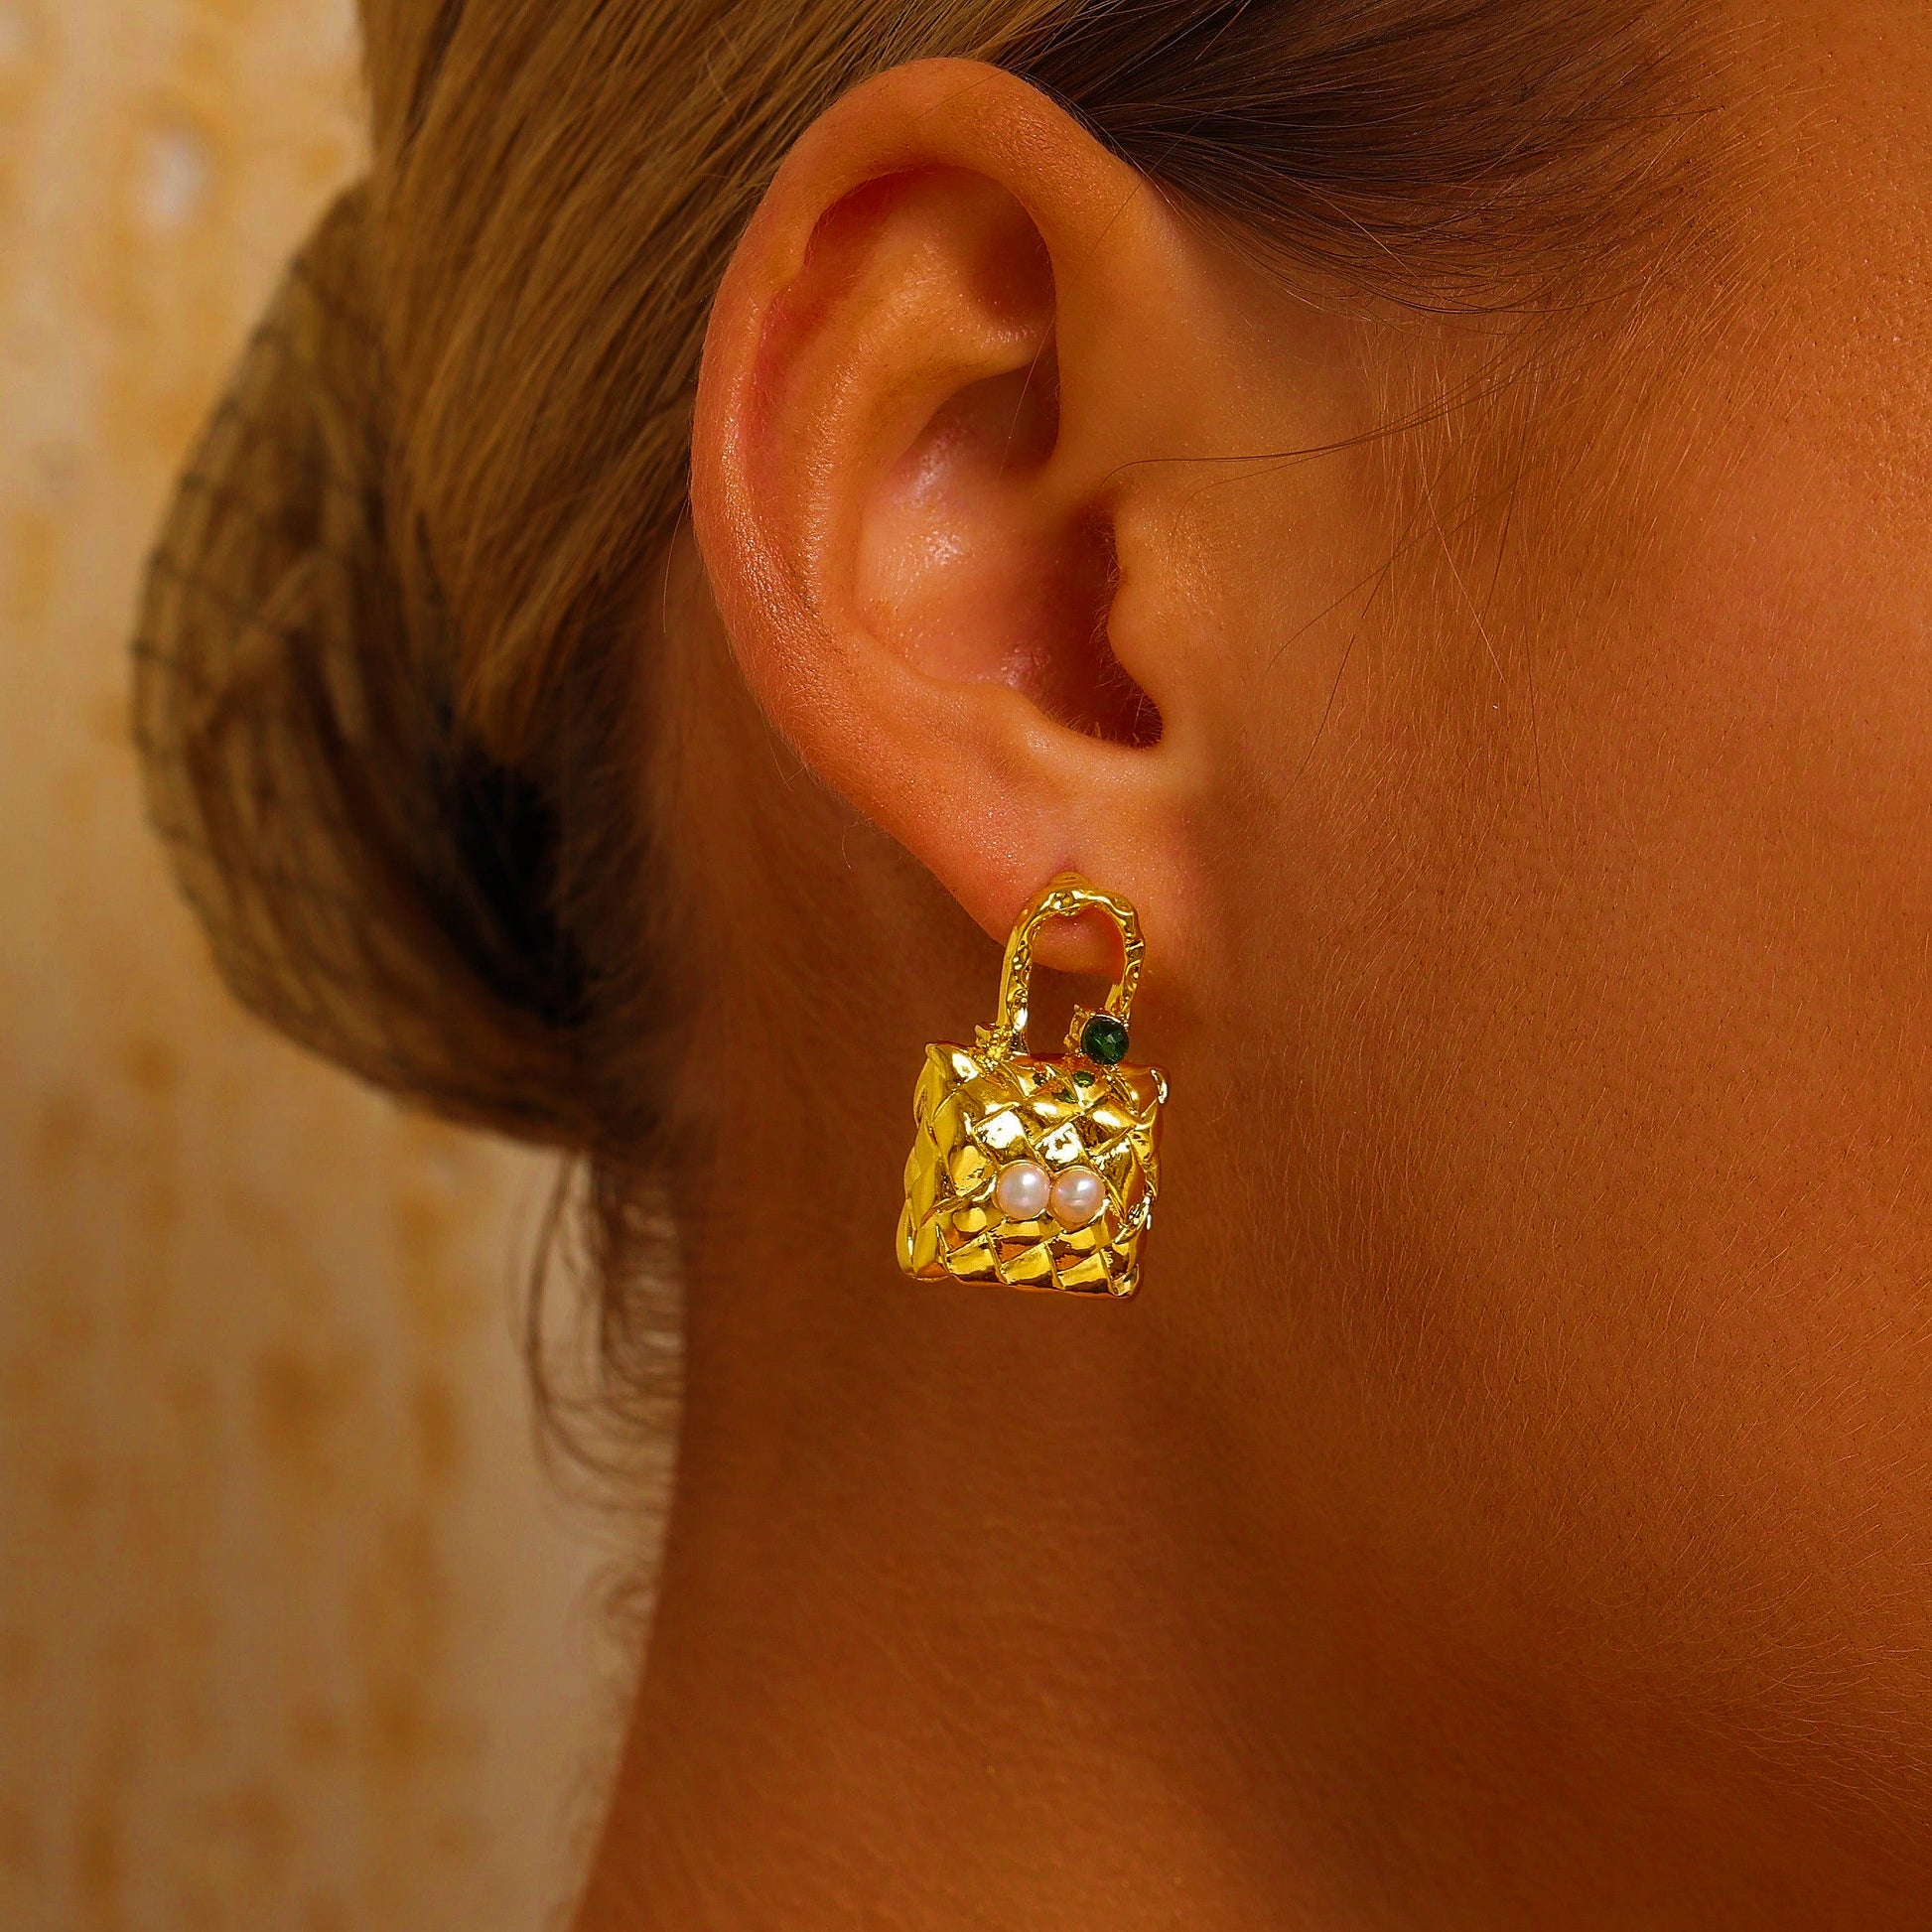 Quilted Handbag Stud Earrings Inlaid with Pearls - 18K Gold Plated - Earrings - ONNNIII